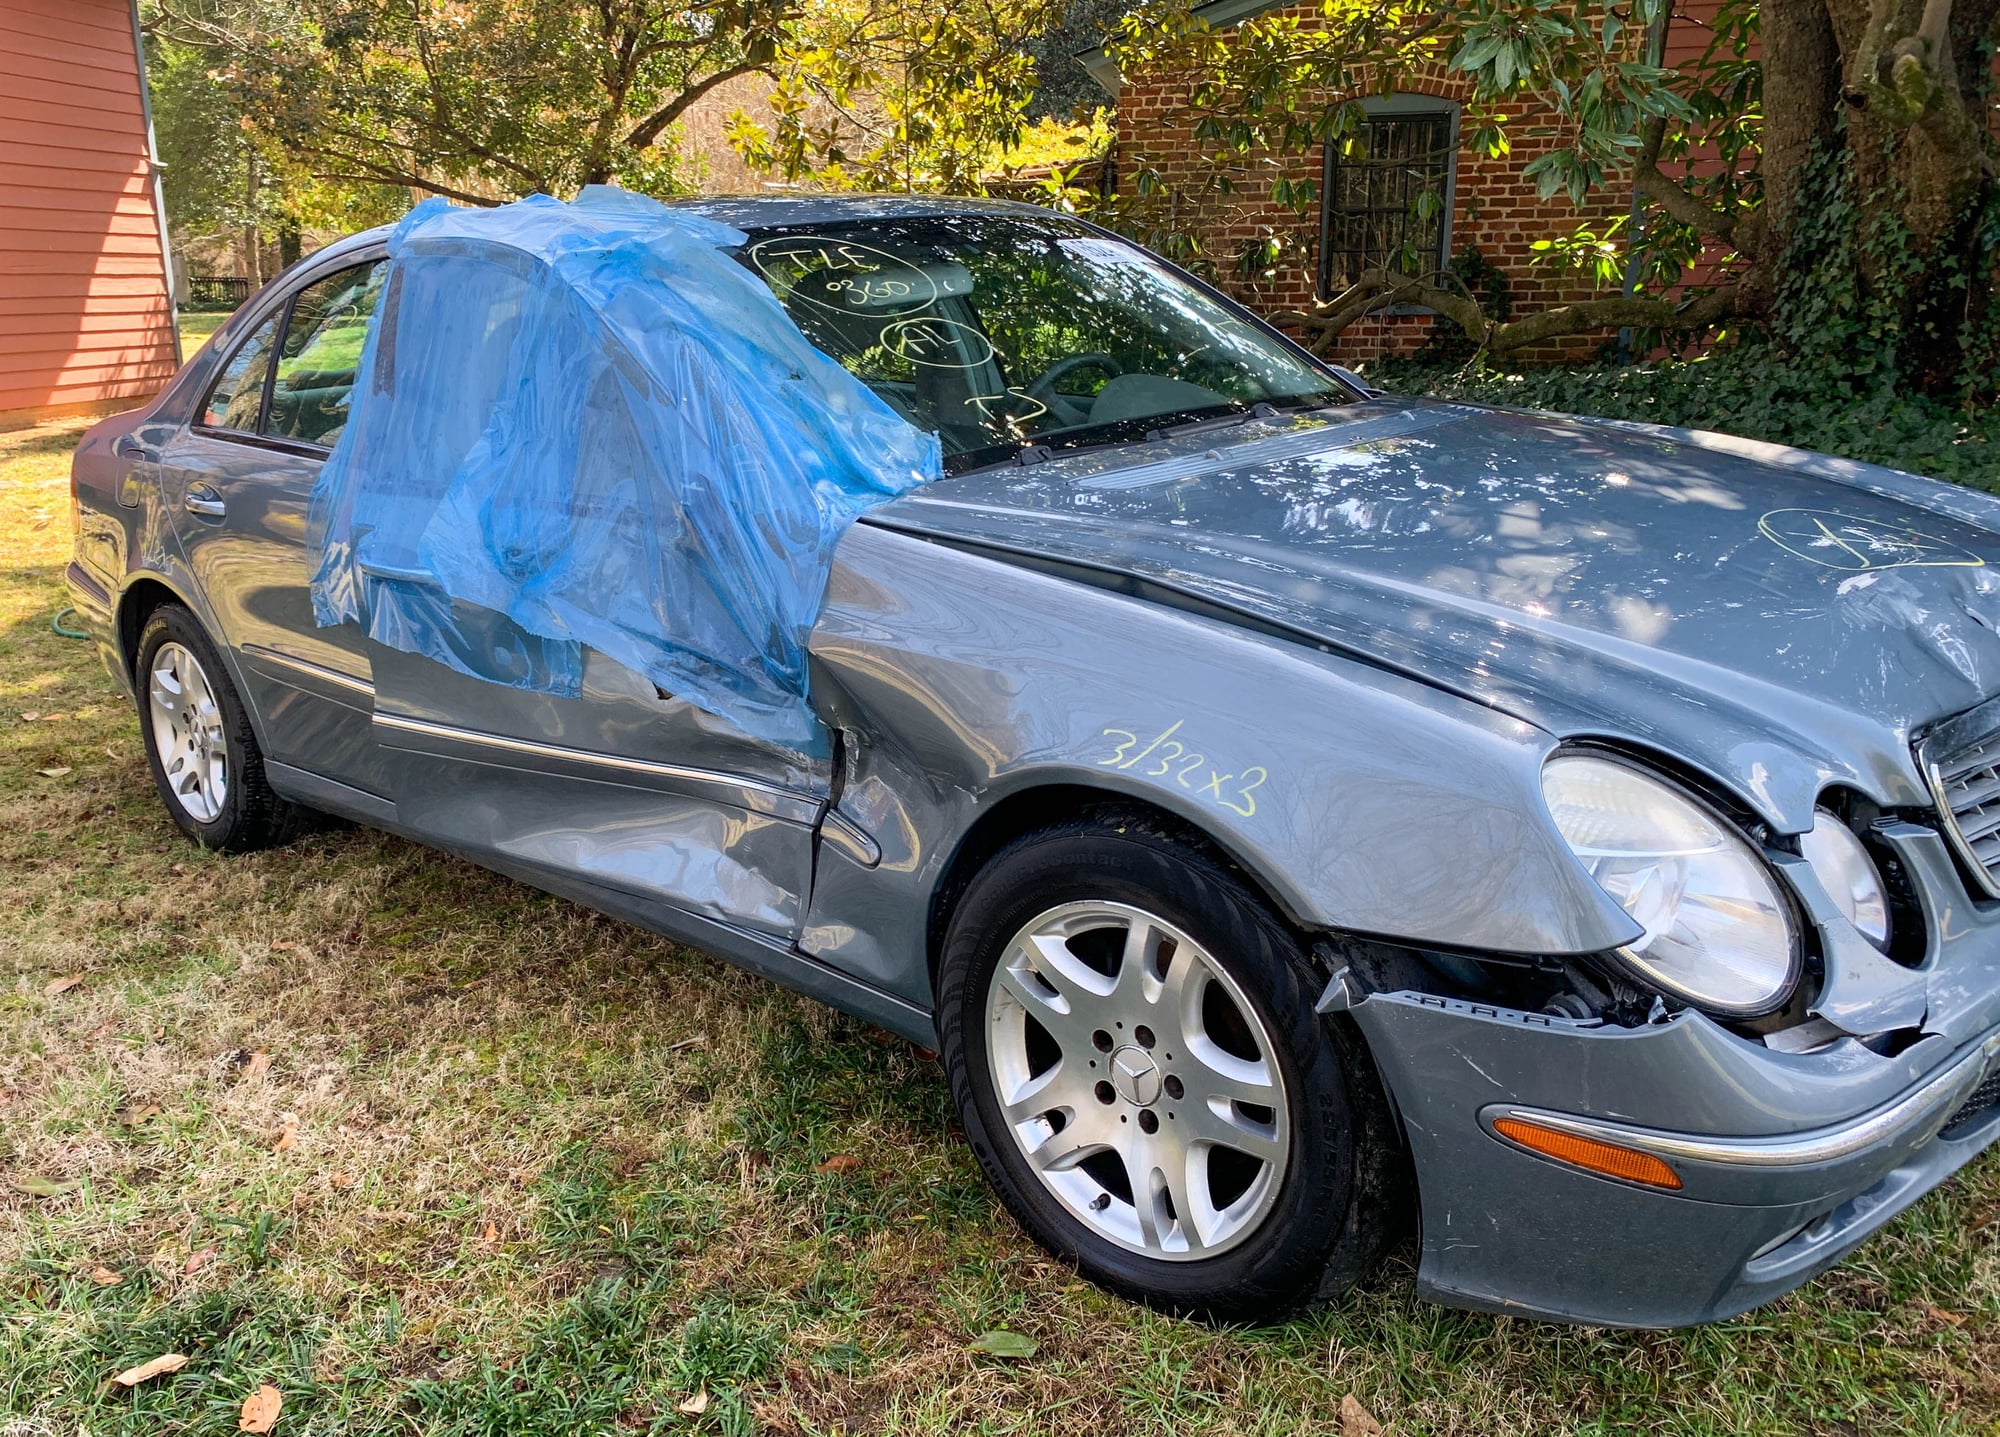 2005 Mercedes-Benz E320 - Low miles E320 CDI runs well, but wrecked. - Used - VIN wdbuf26j95a769723 - 122,409 Miles - 6 cyl - 2WD - Automatic - Sedan - Gray - Richmond, VA 23227, United States